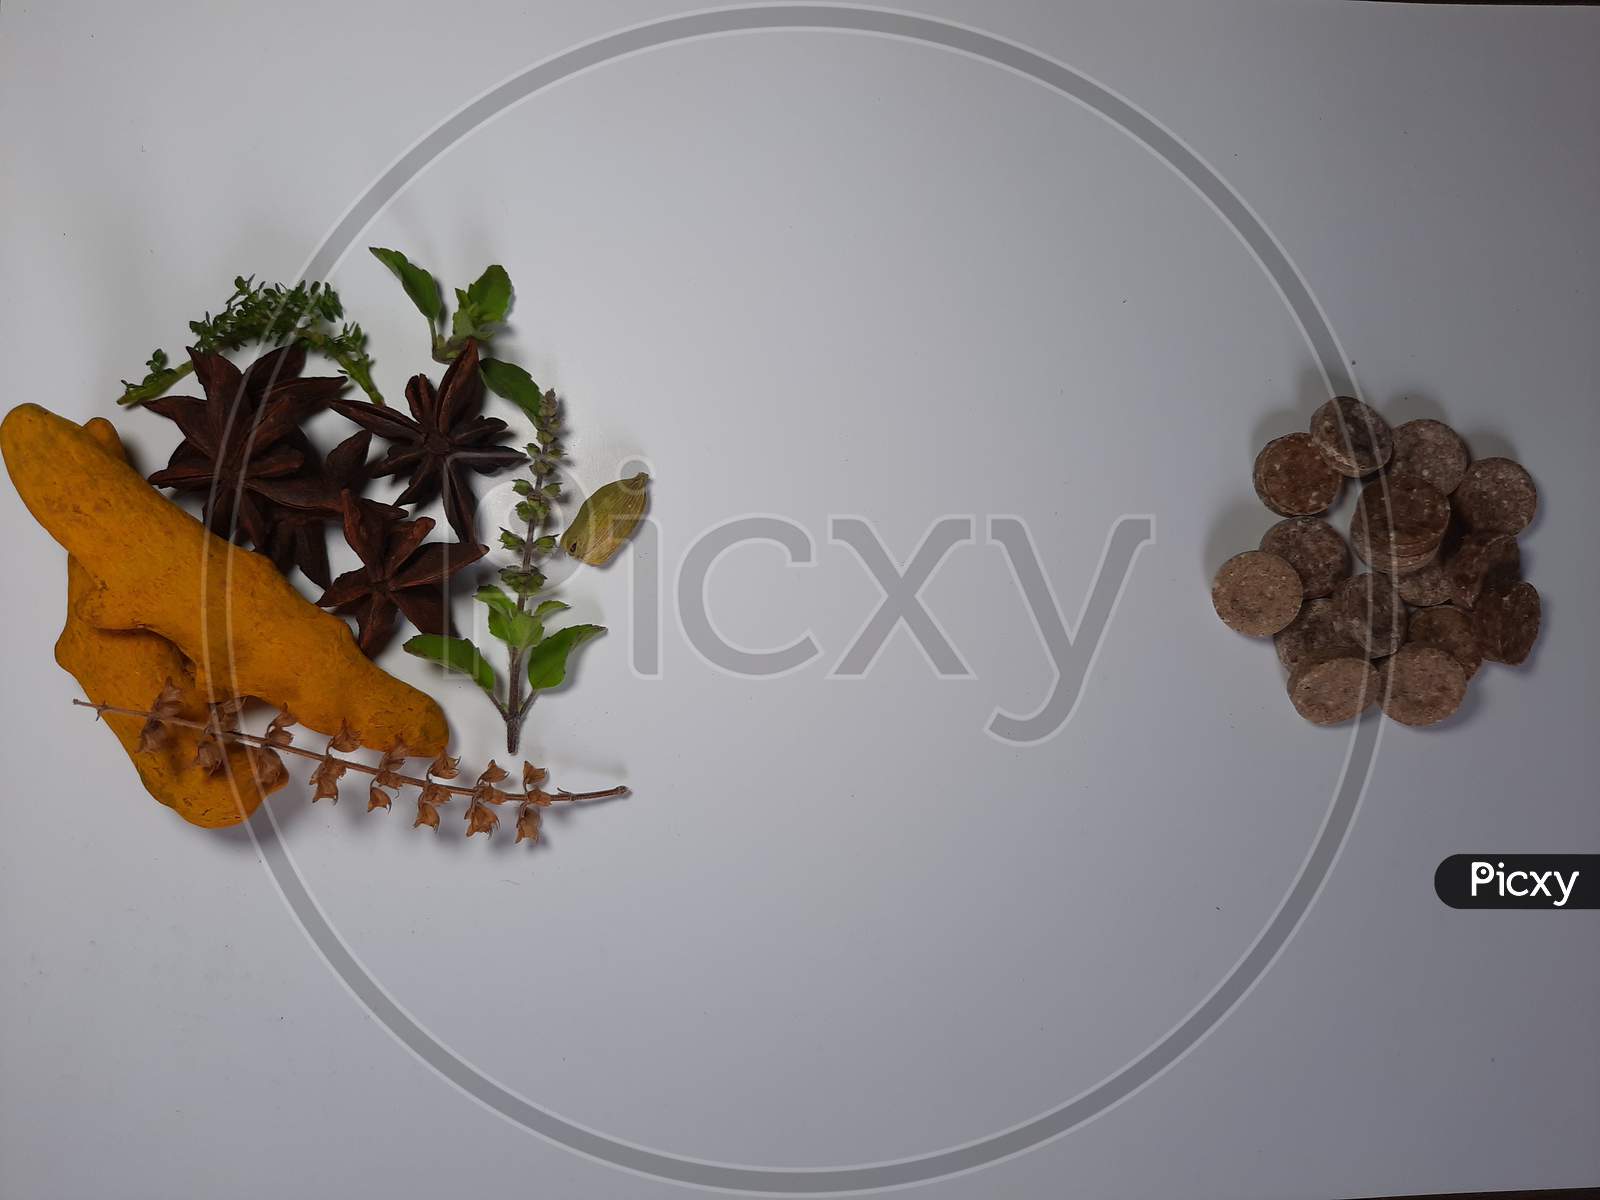 Herbal Medicine Vs Brown Pills Isolated Medicine The Alternative Healthy Care On White Background.